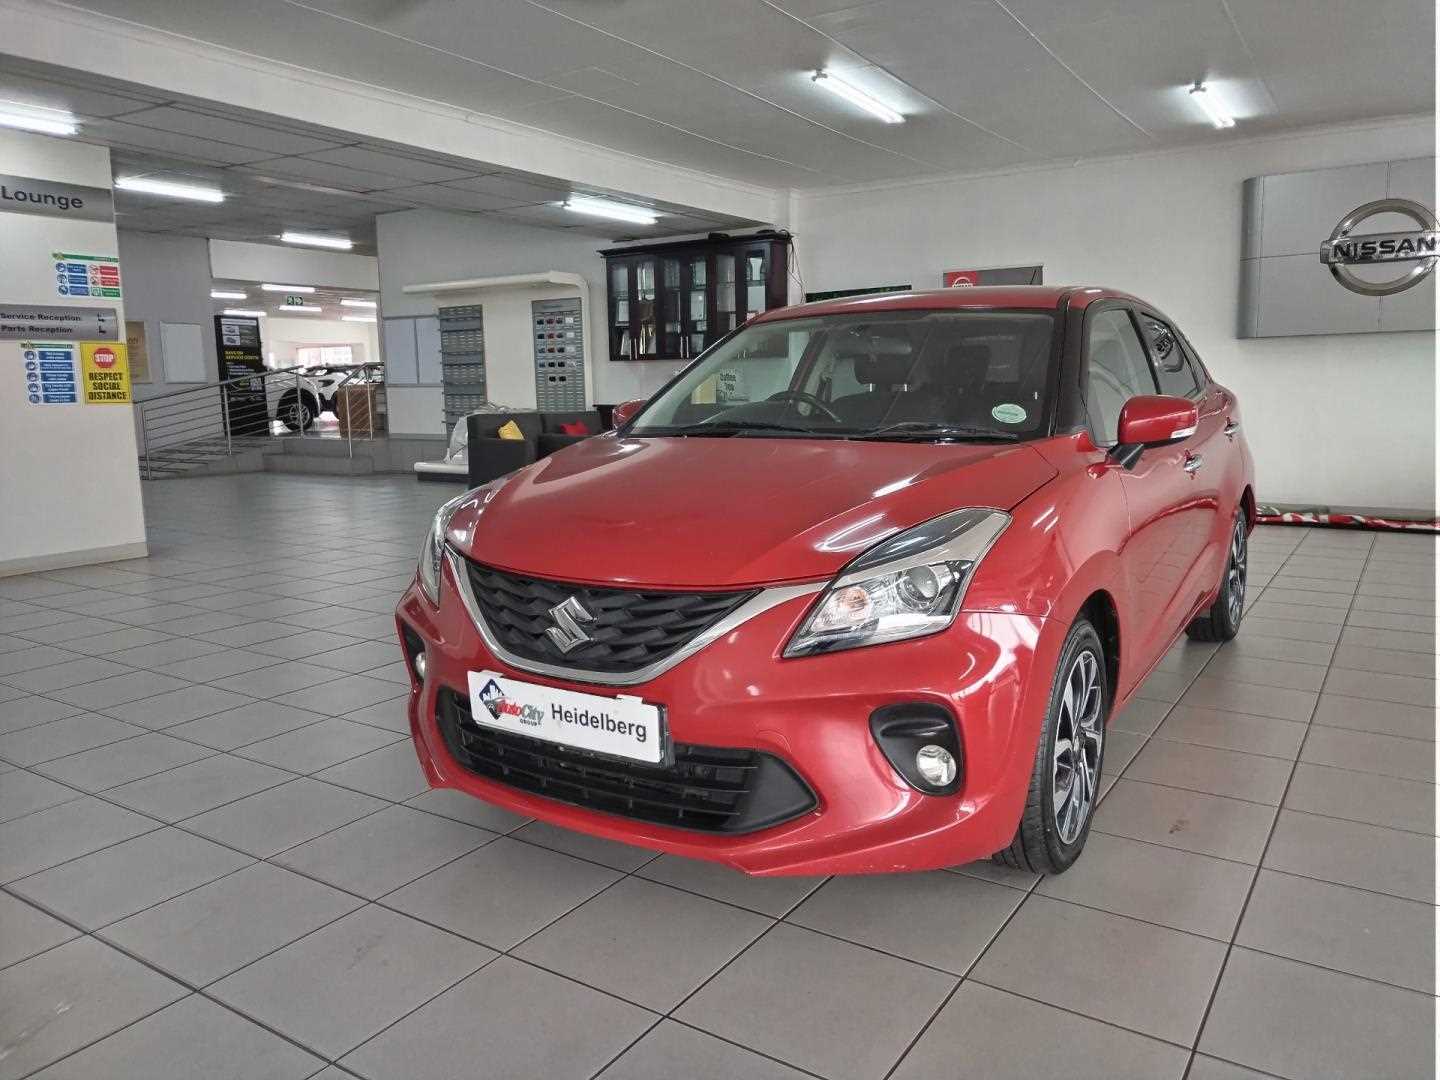 SUZUKI BALENO 1.4 GLX 5DR A/T for Sale in South Africa